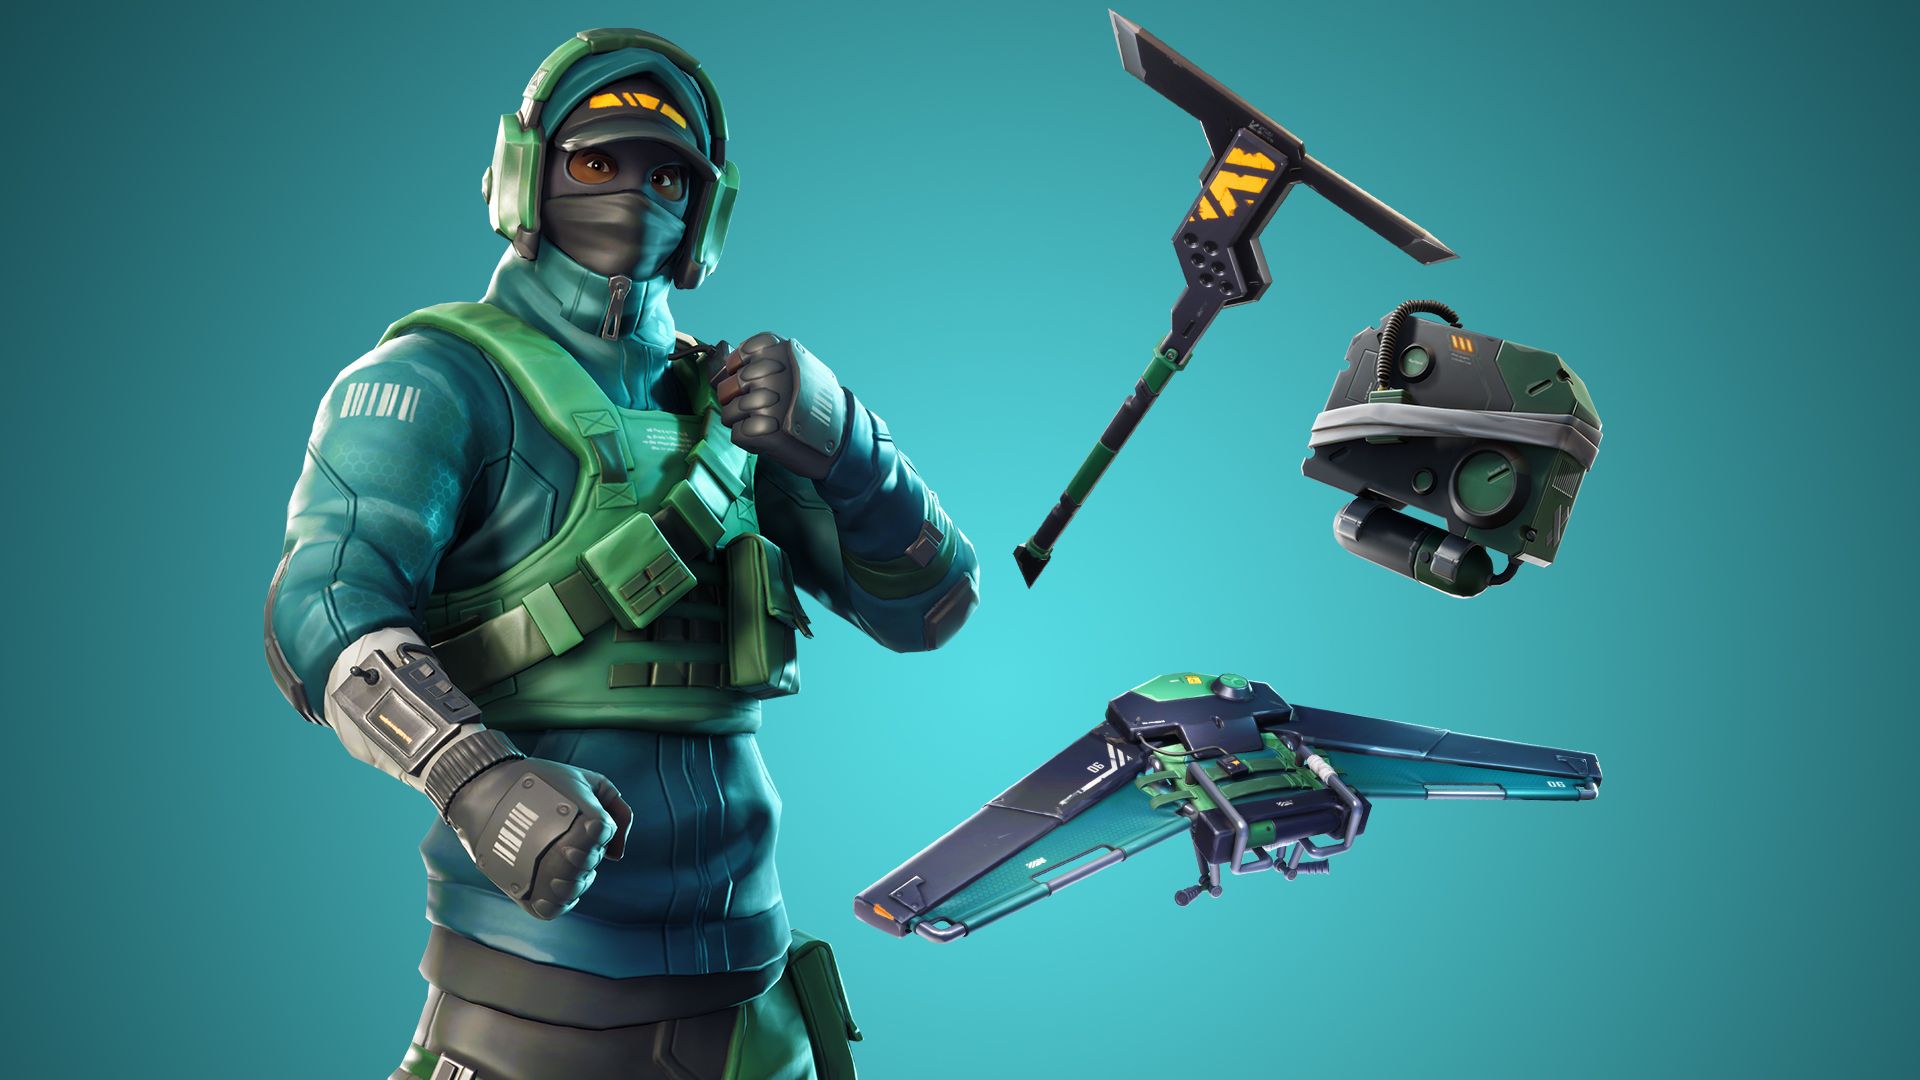 Fortnite GeForce Counterattack Bundle To Receive Variant for Previous Owners